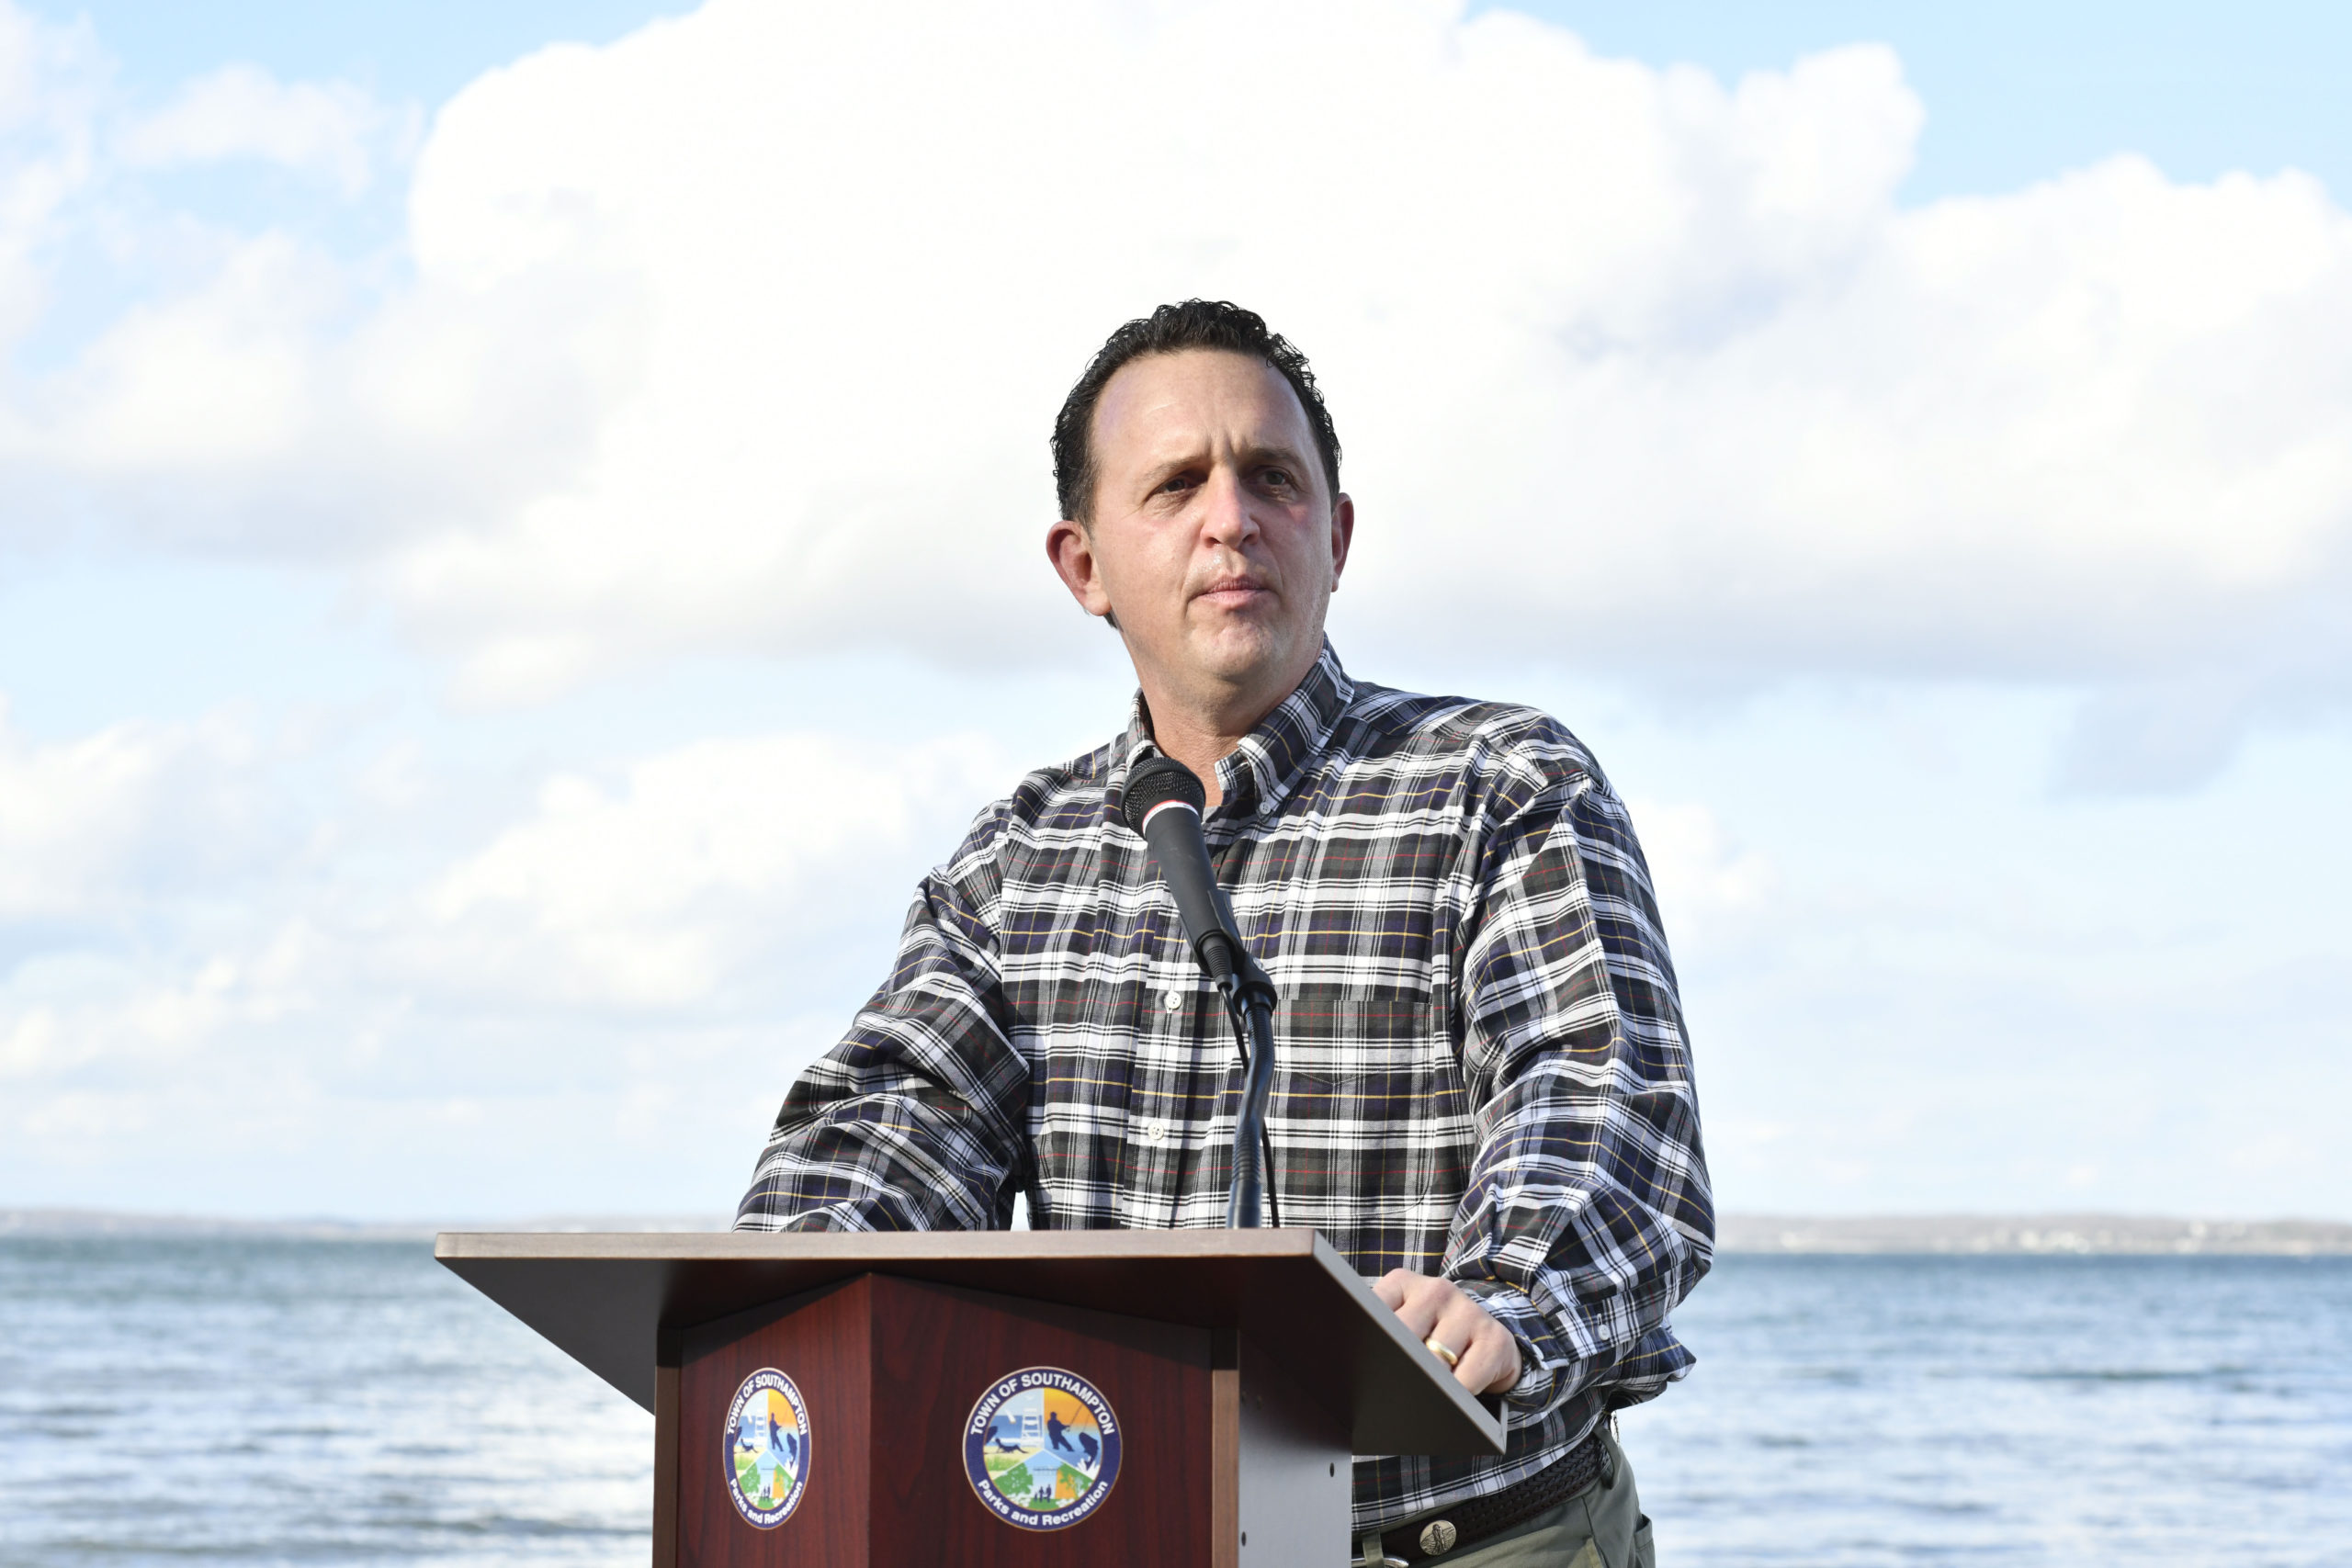 North Sea Beach Colony Association President Nat Wienecke speaks at a press conference on Tuesday at North Sea Beach.    DANA SHAW